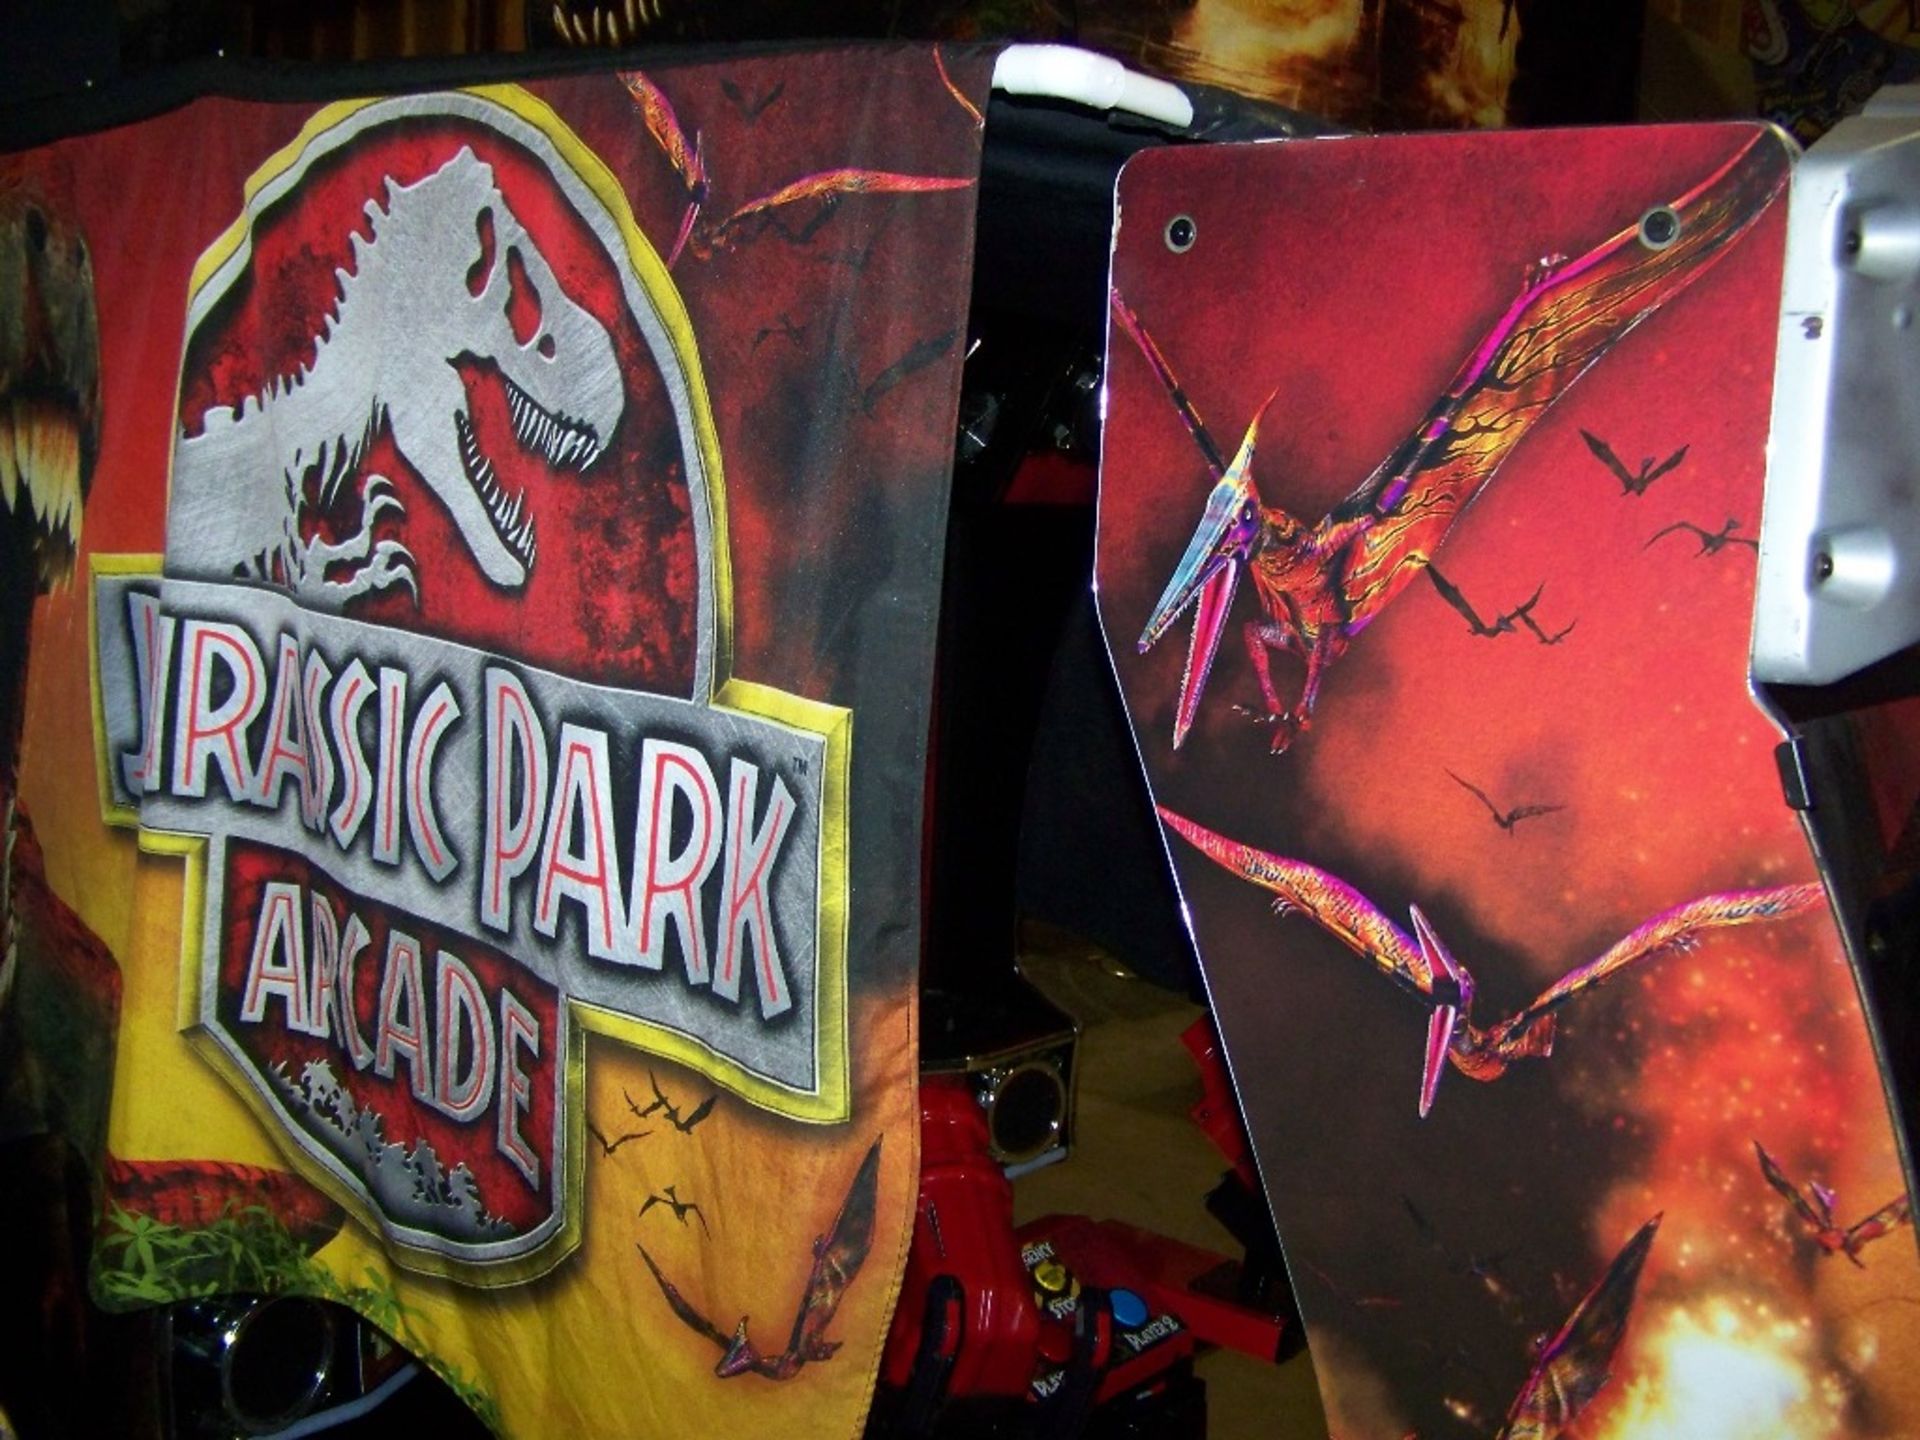 JURASSIC PARK MOTION DELUXE ARCADE RAW THRILLS - Image 15 of 16